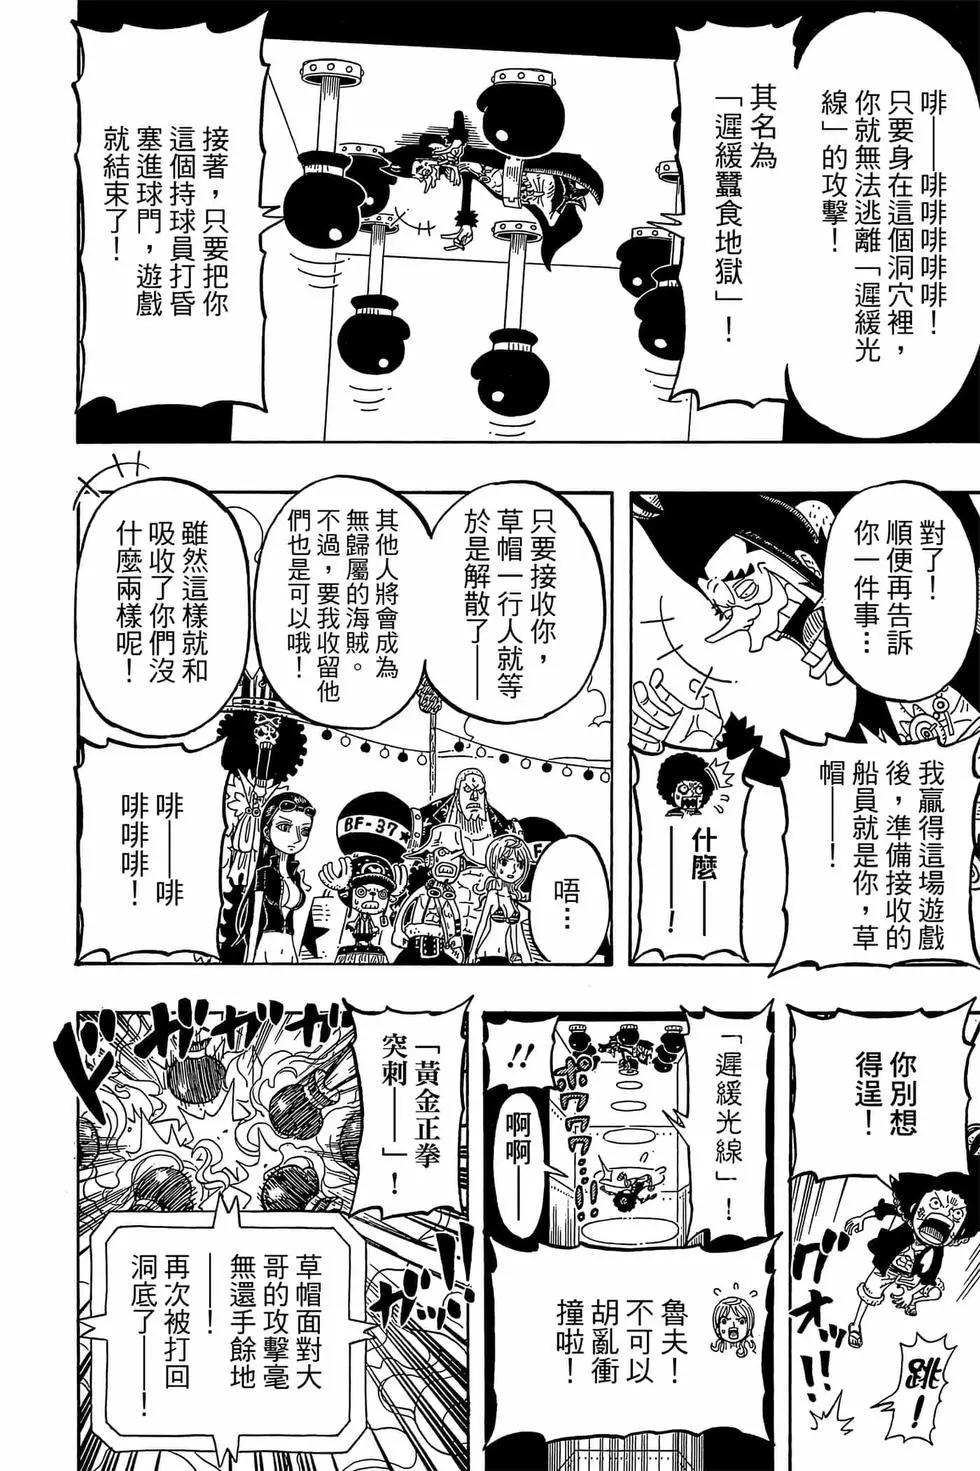 One piece party - 第02卷(1/4) - 1